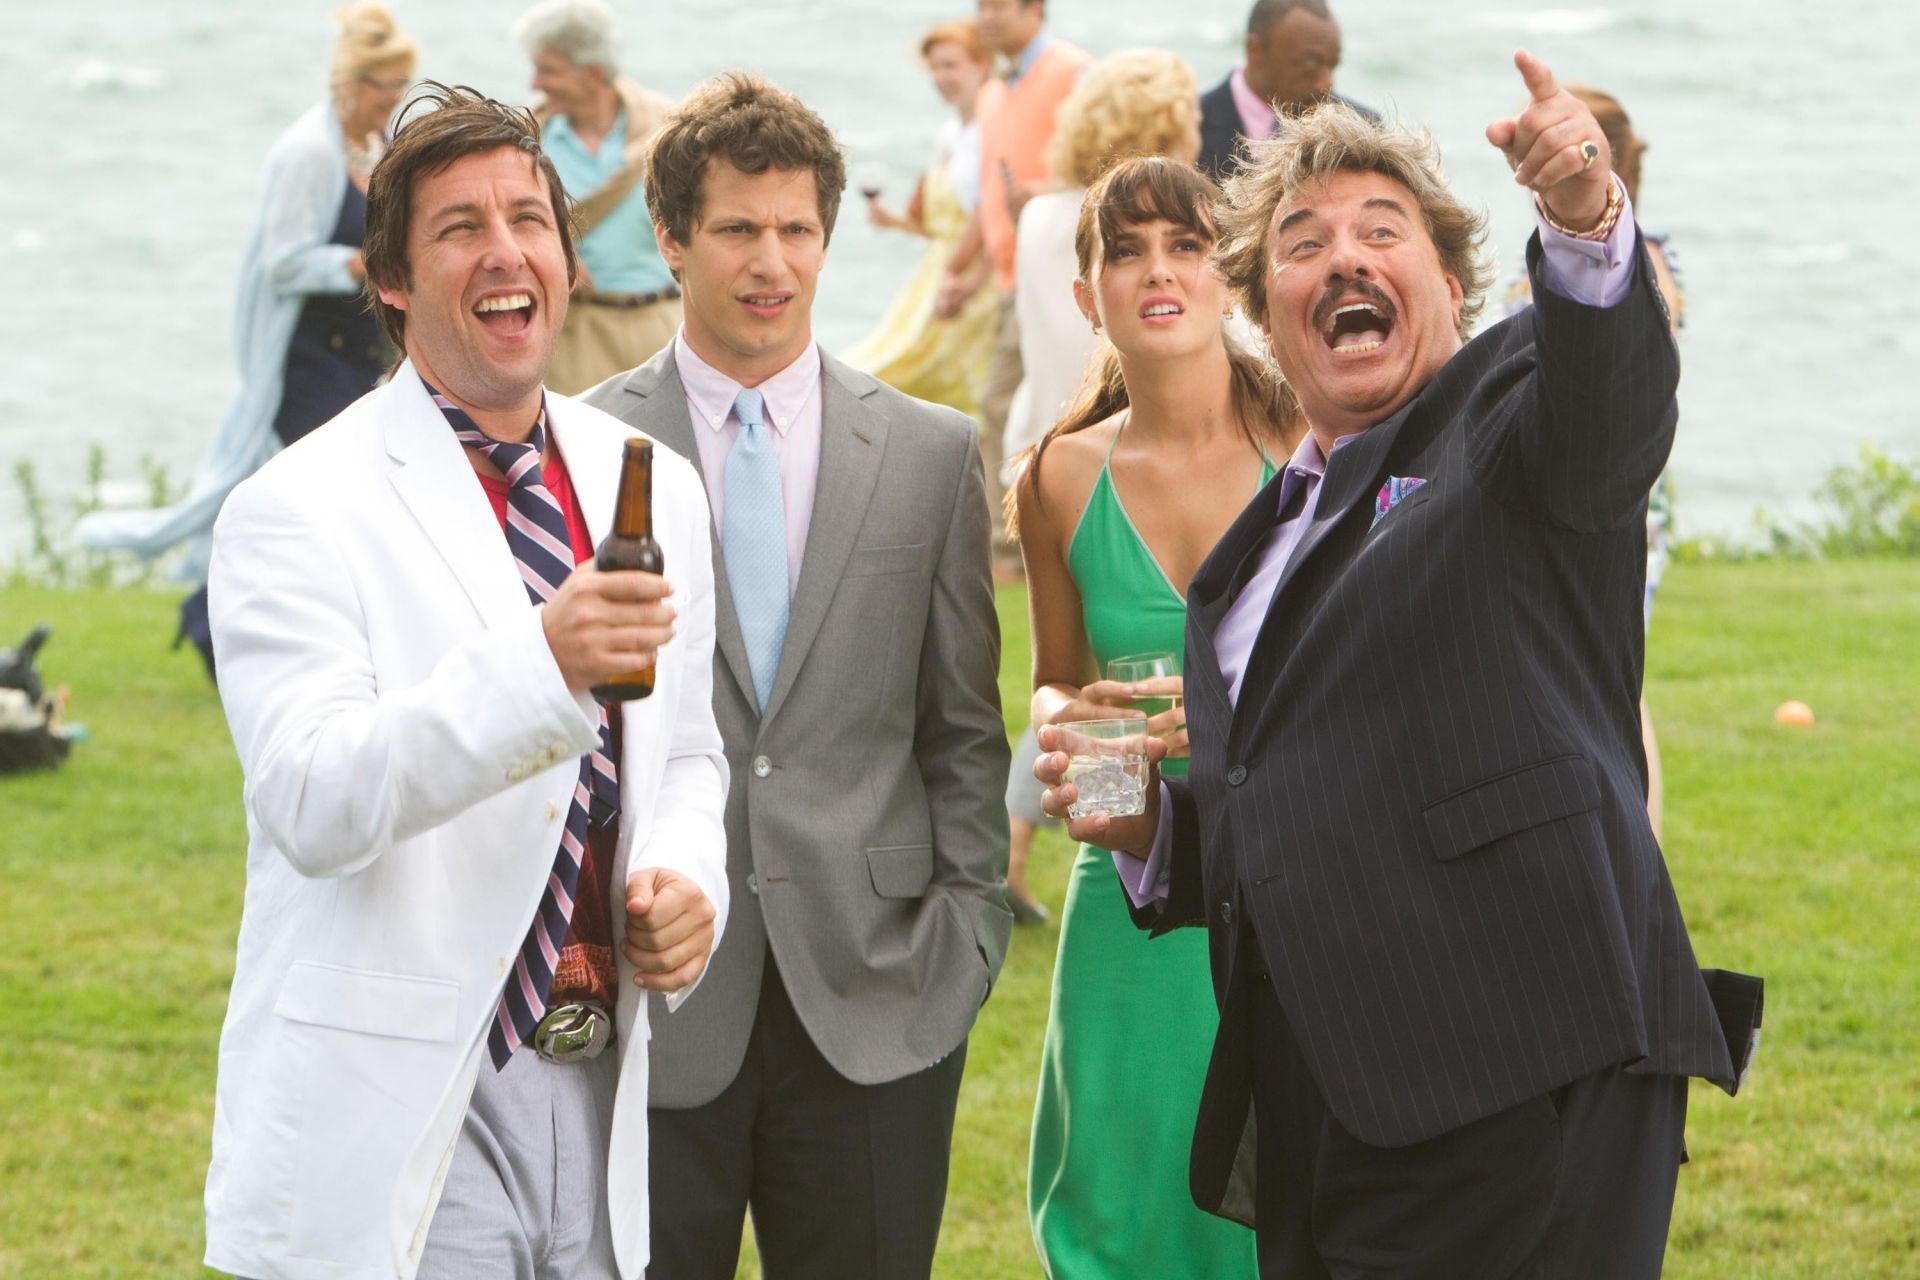 Adam Sandler, Andy Samberg, Leighton Meester and Tony Orlando in Columbia Pictures' That's My Boy (2012). Photo credit by Tracy Bennett.